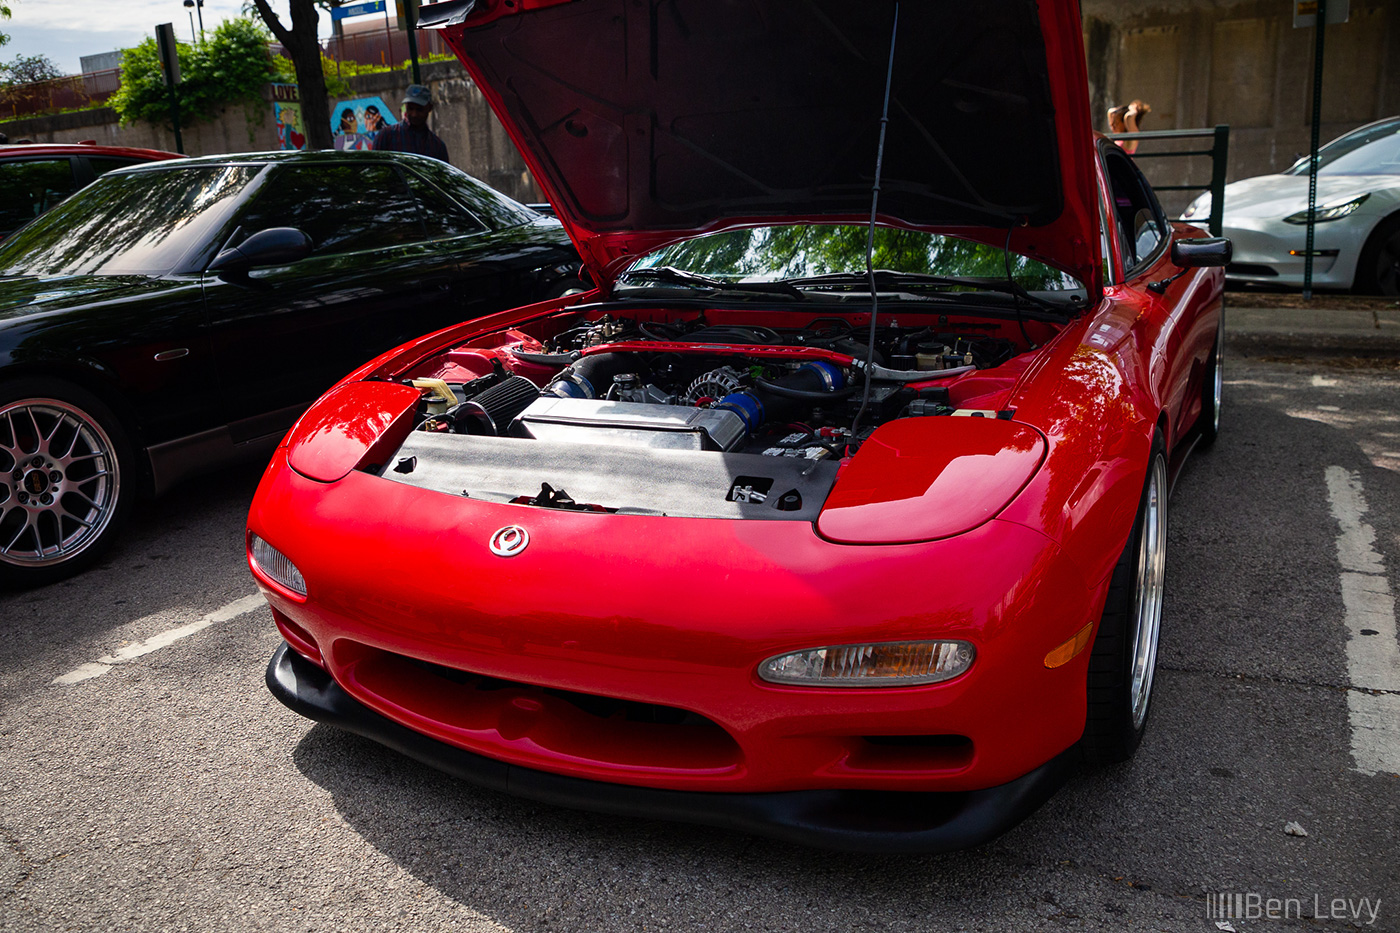 Open Hood on Red FD RX-7